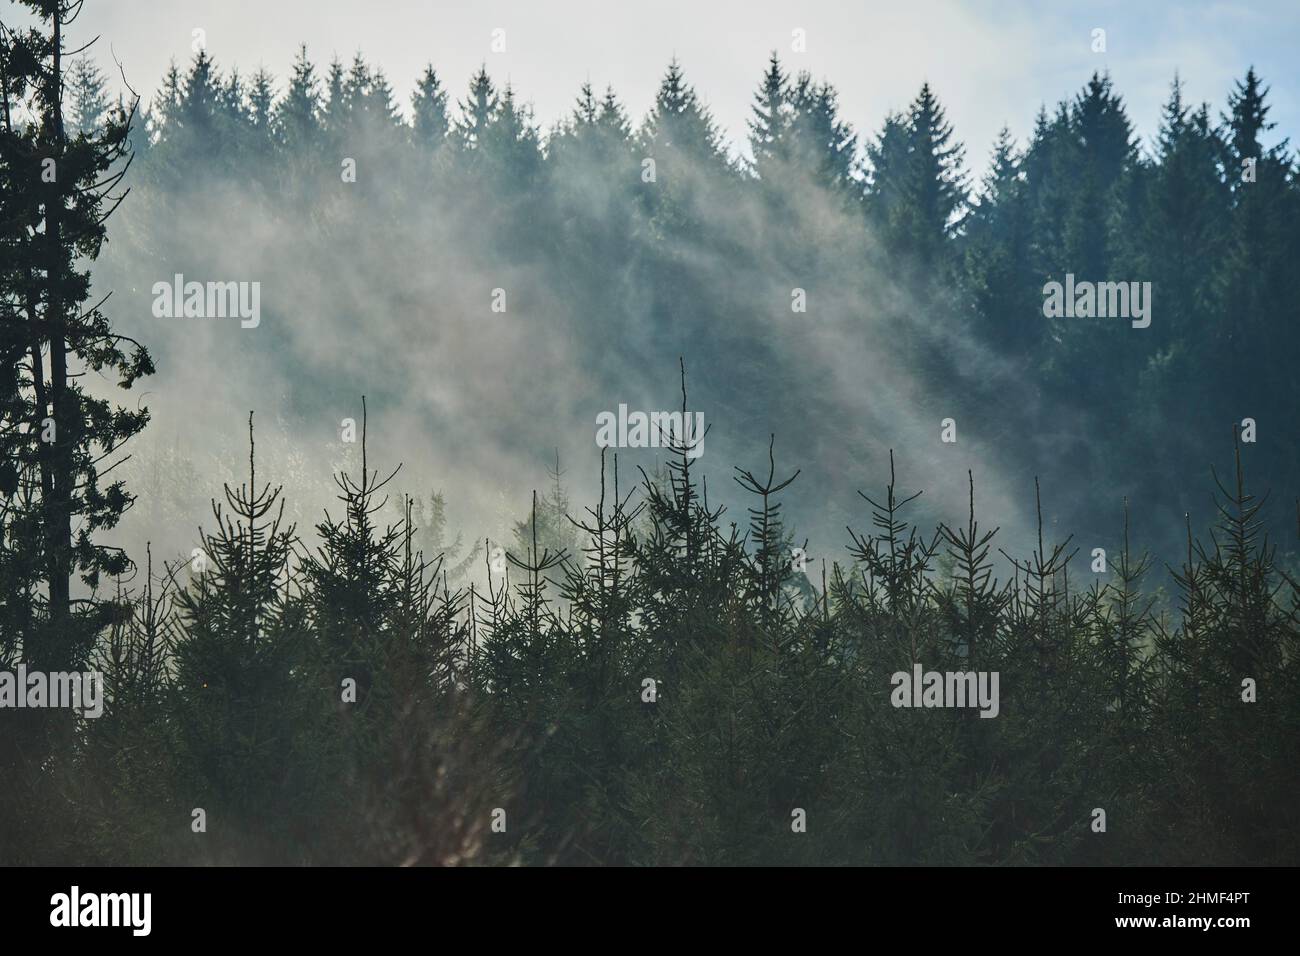 Fog flying over young Norway spruce (Picea abies) trees in a forest, Kleine Fatra, Carpathian Mountains, border, Czech Republick, Slovakia Stock Photo